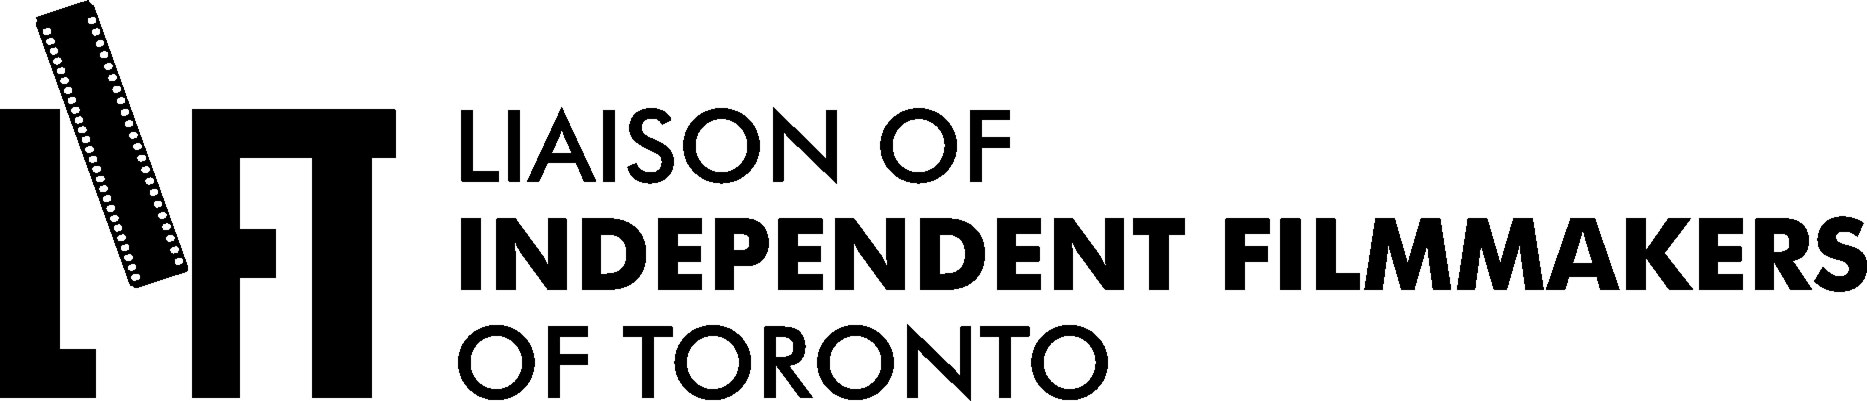 Liaison of Independent Filmmakers of Toronto (LIFT) logo